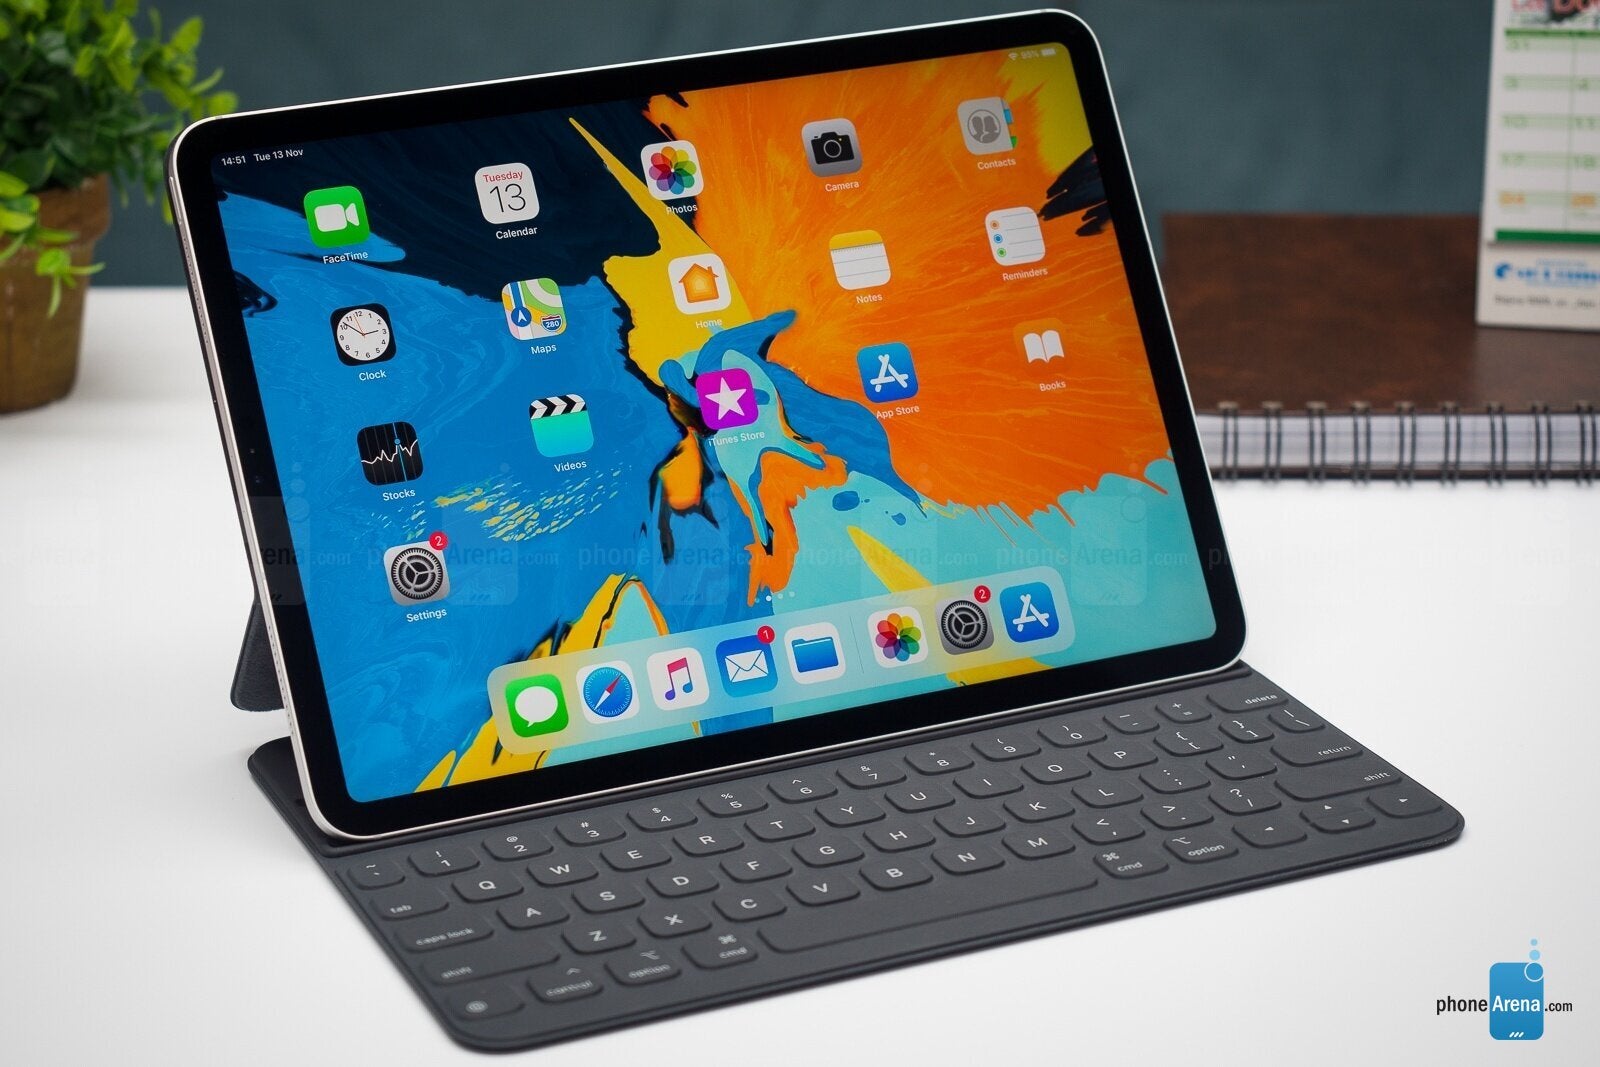 11-inch iPad Pro - Is Apple's iPad lineup getting too confusing for its own good?